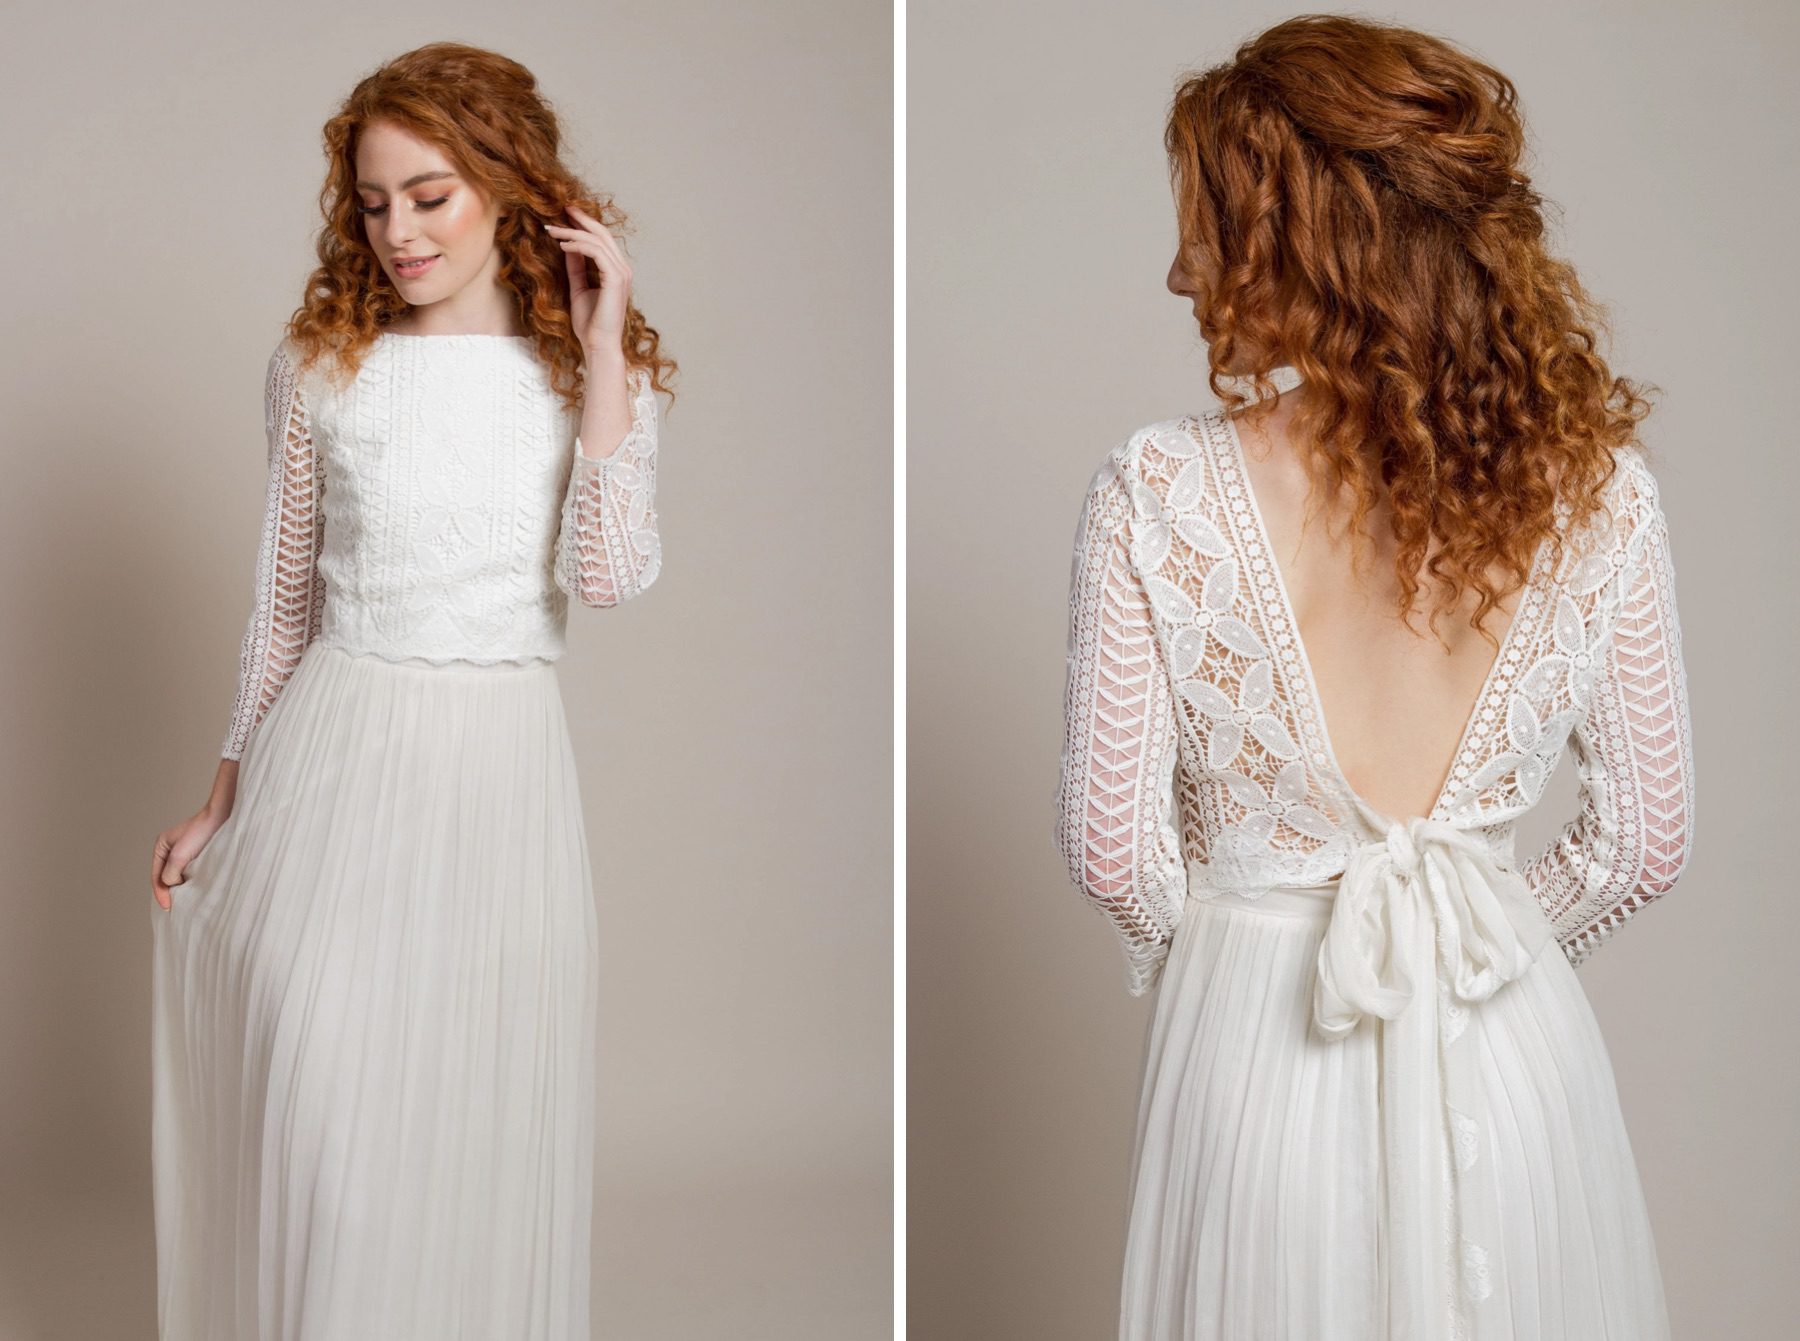 Ethical Wedding Dresses by Indiebride